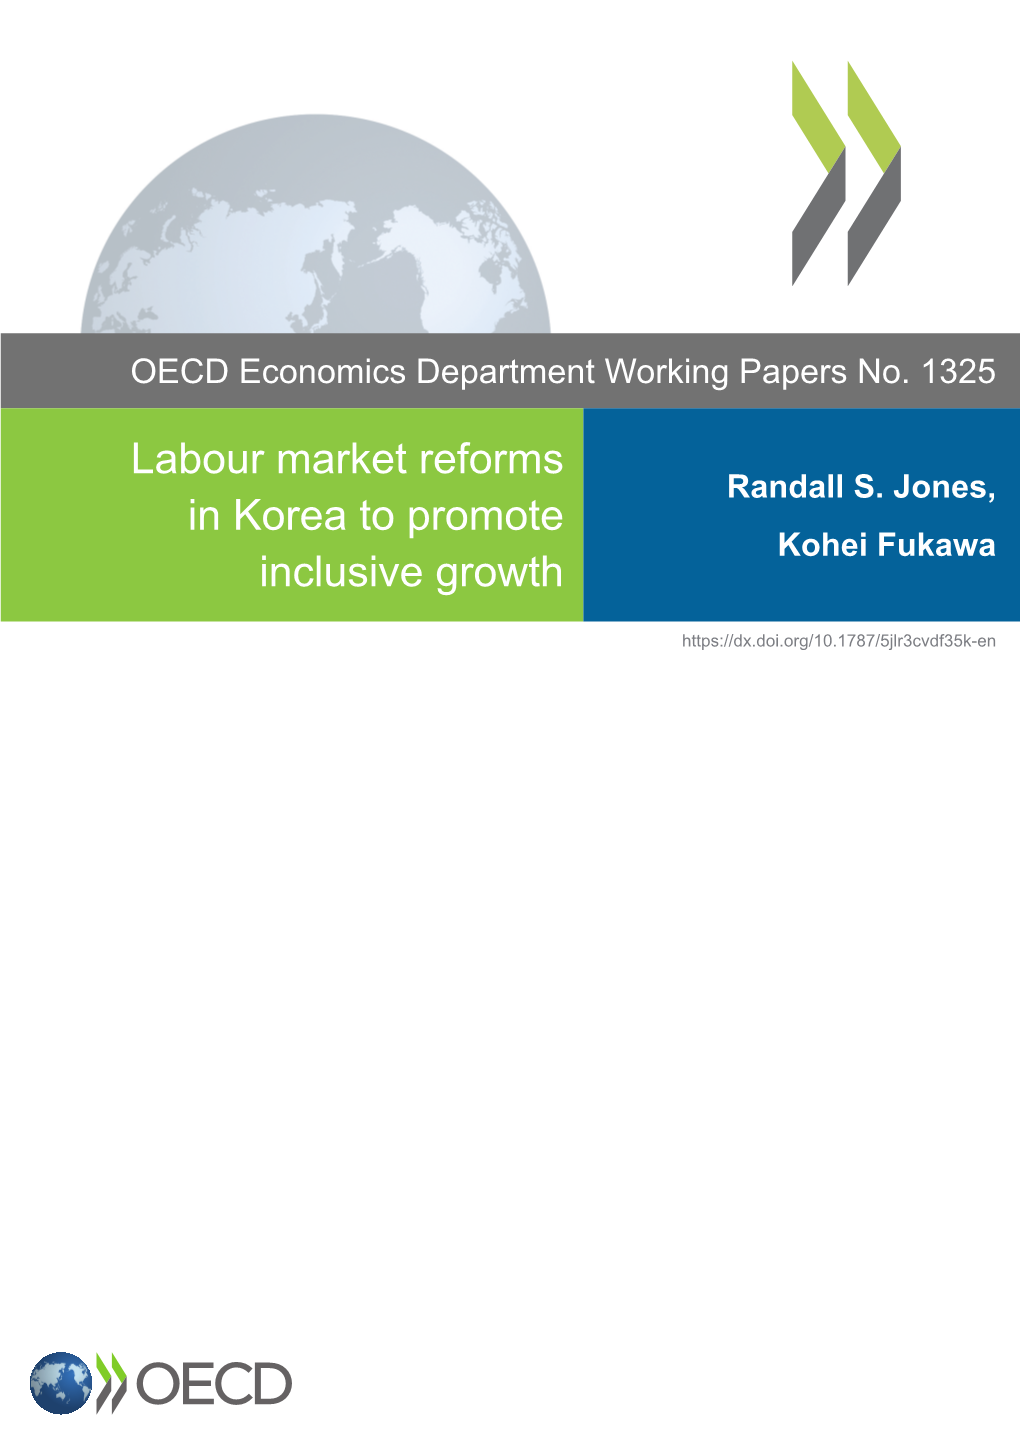 Labour Market Reforms in Korea to Promote Inclusive Growth